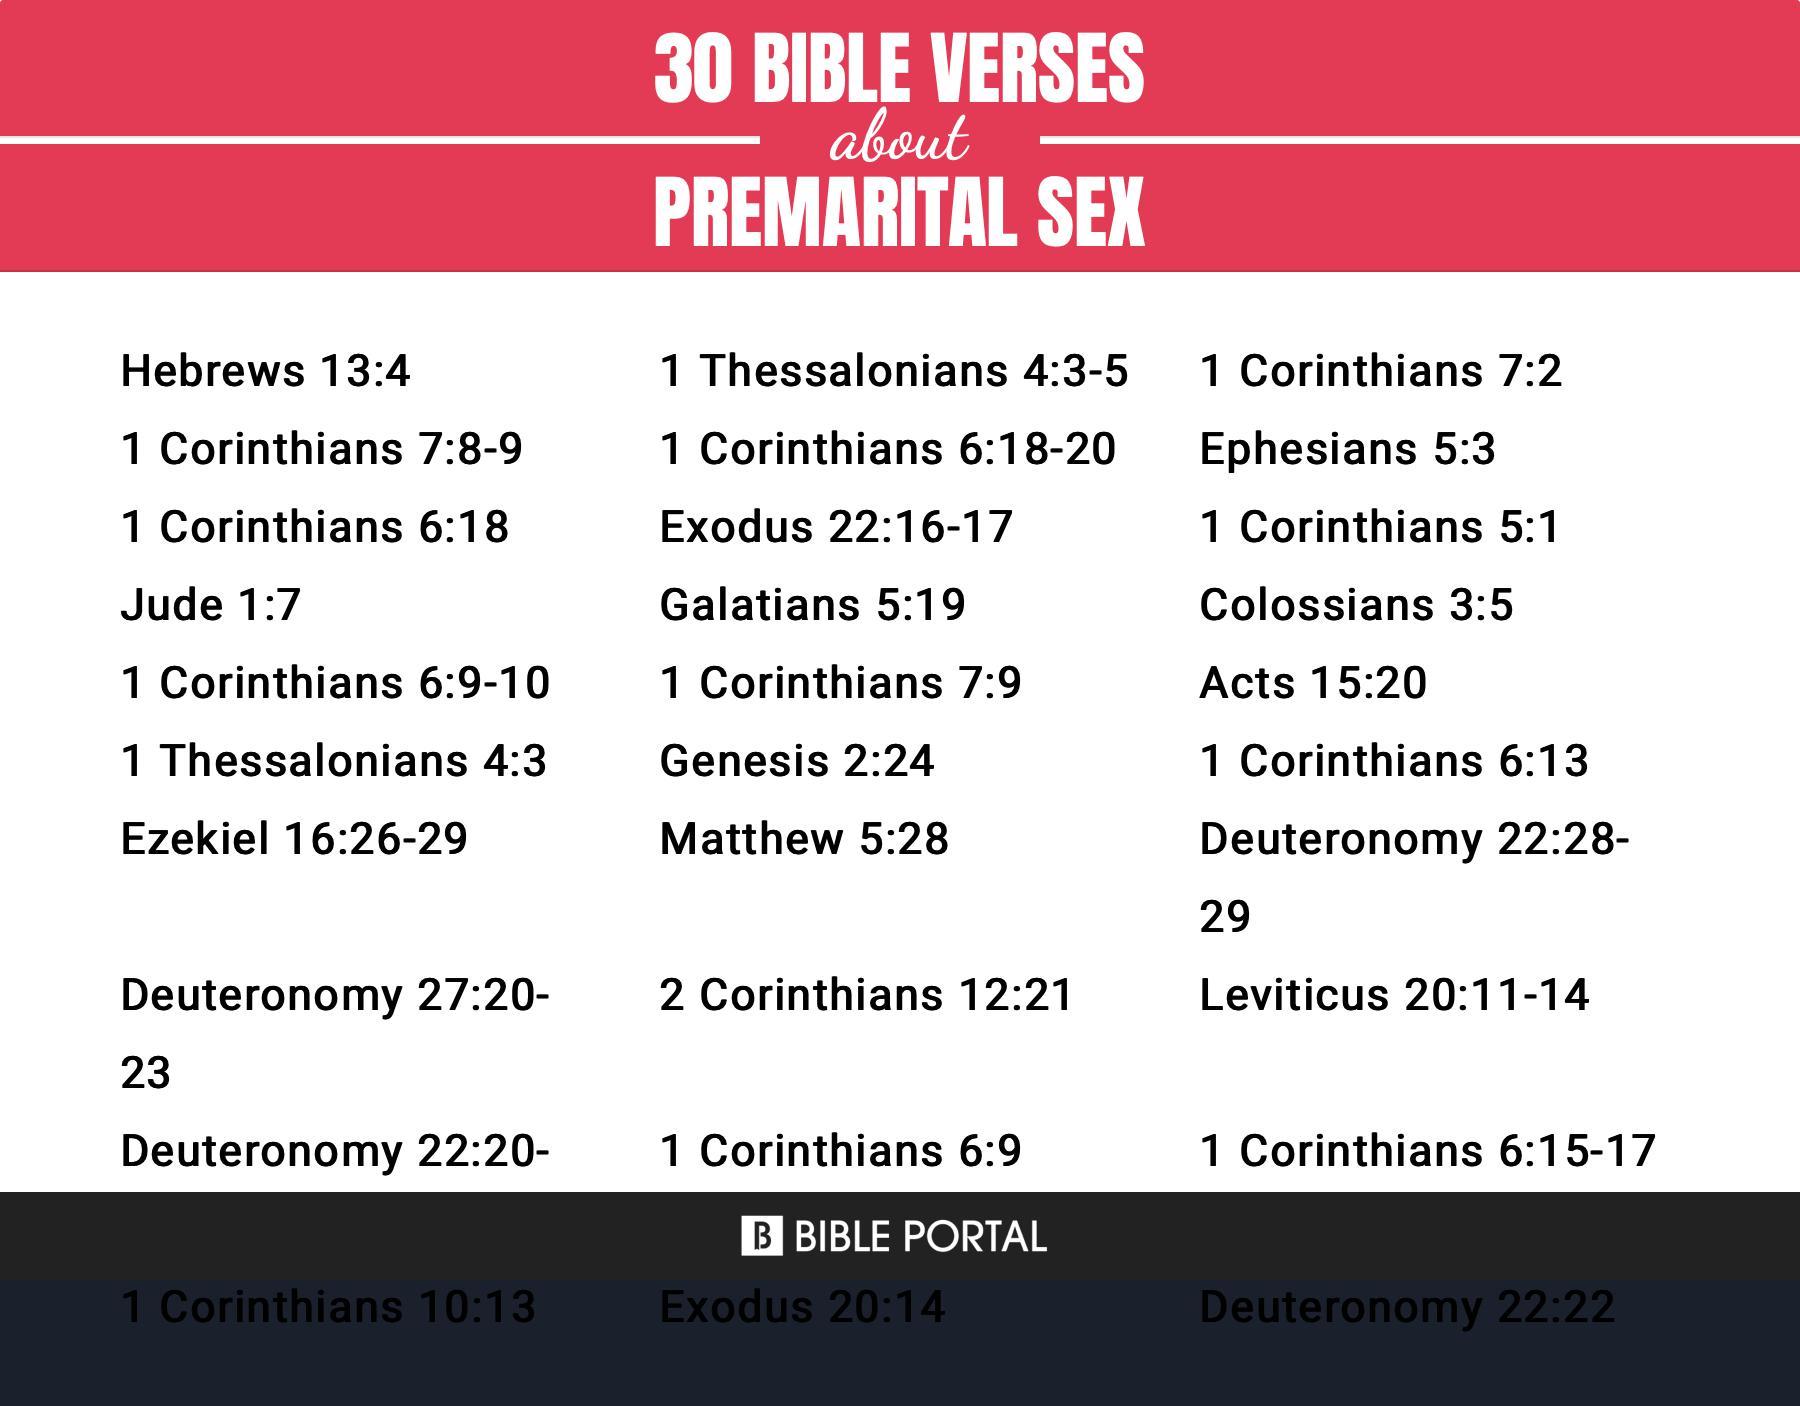 What Does the Bible Say about Premarital Sex?